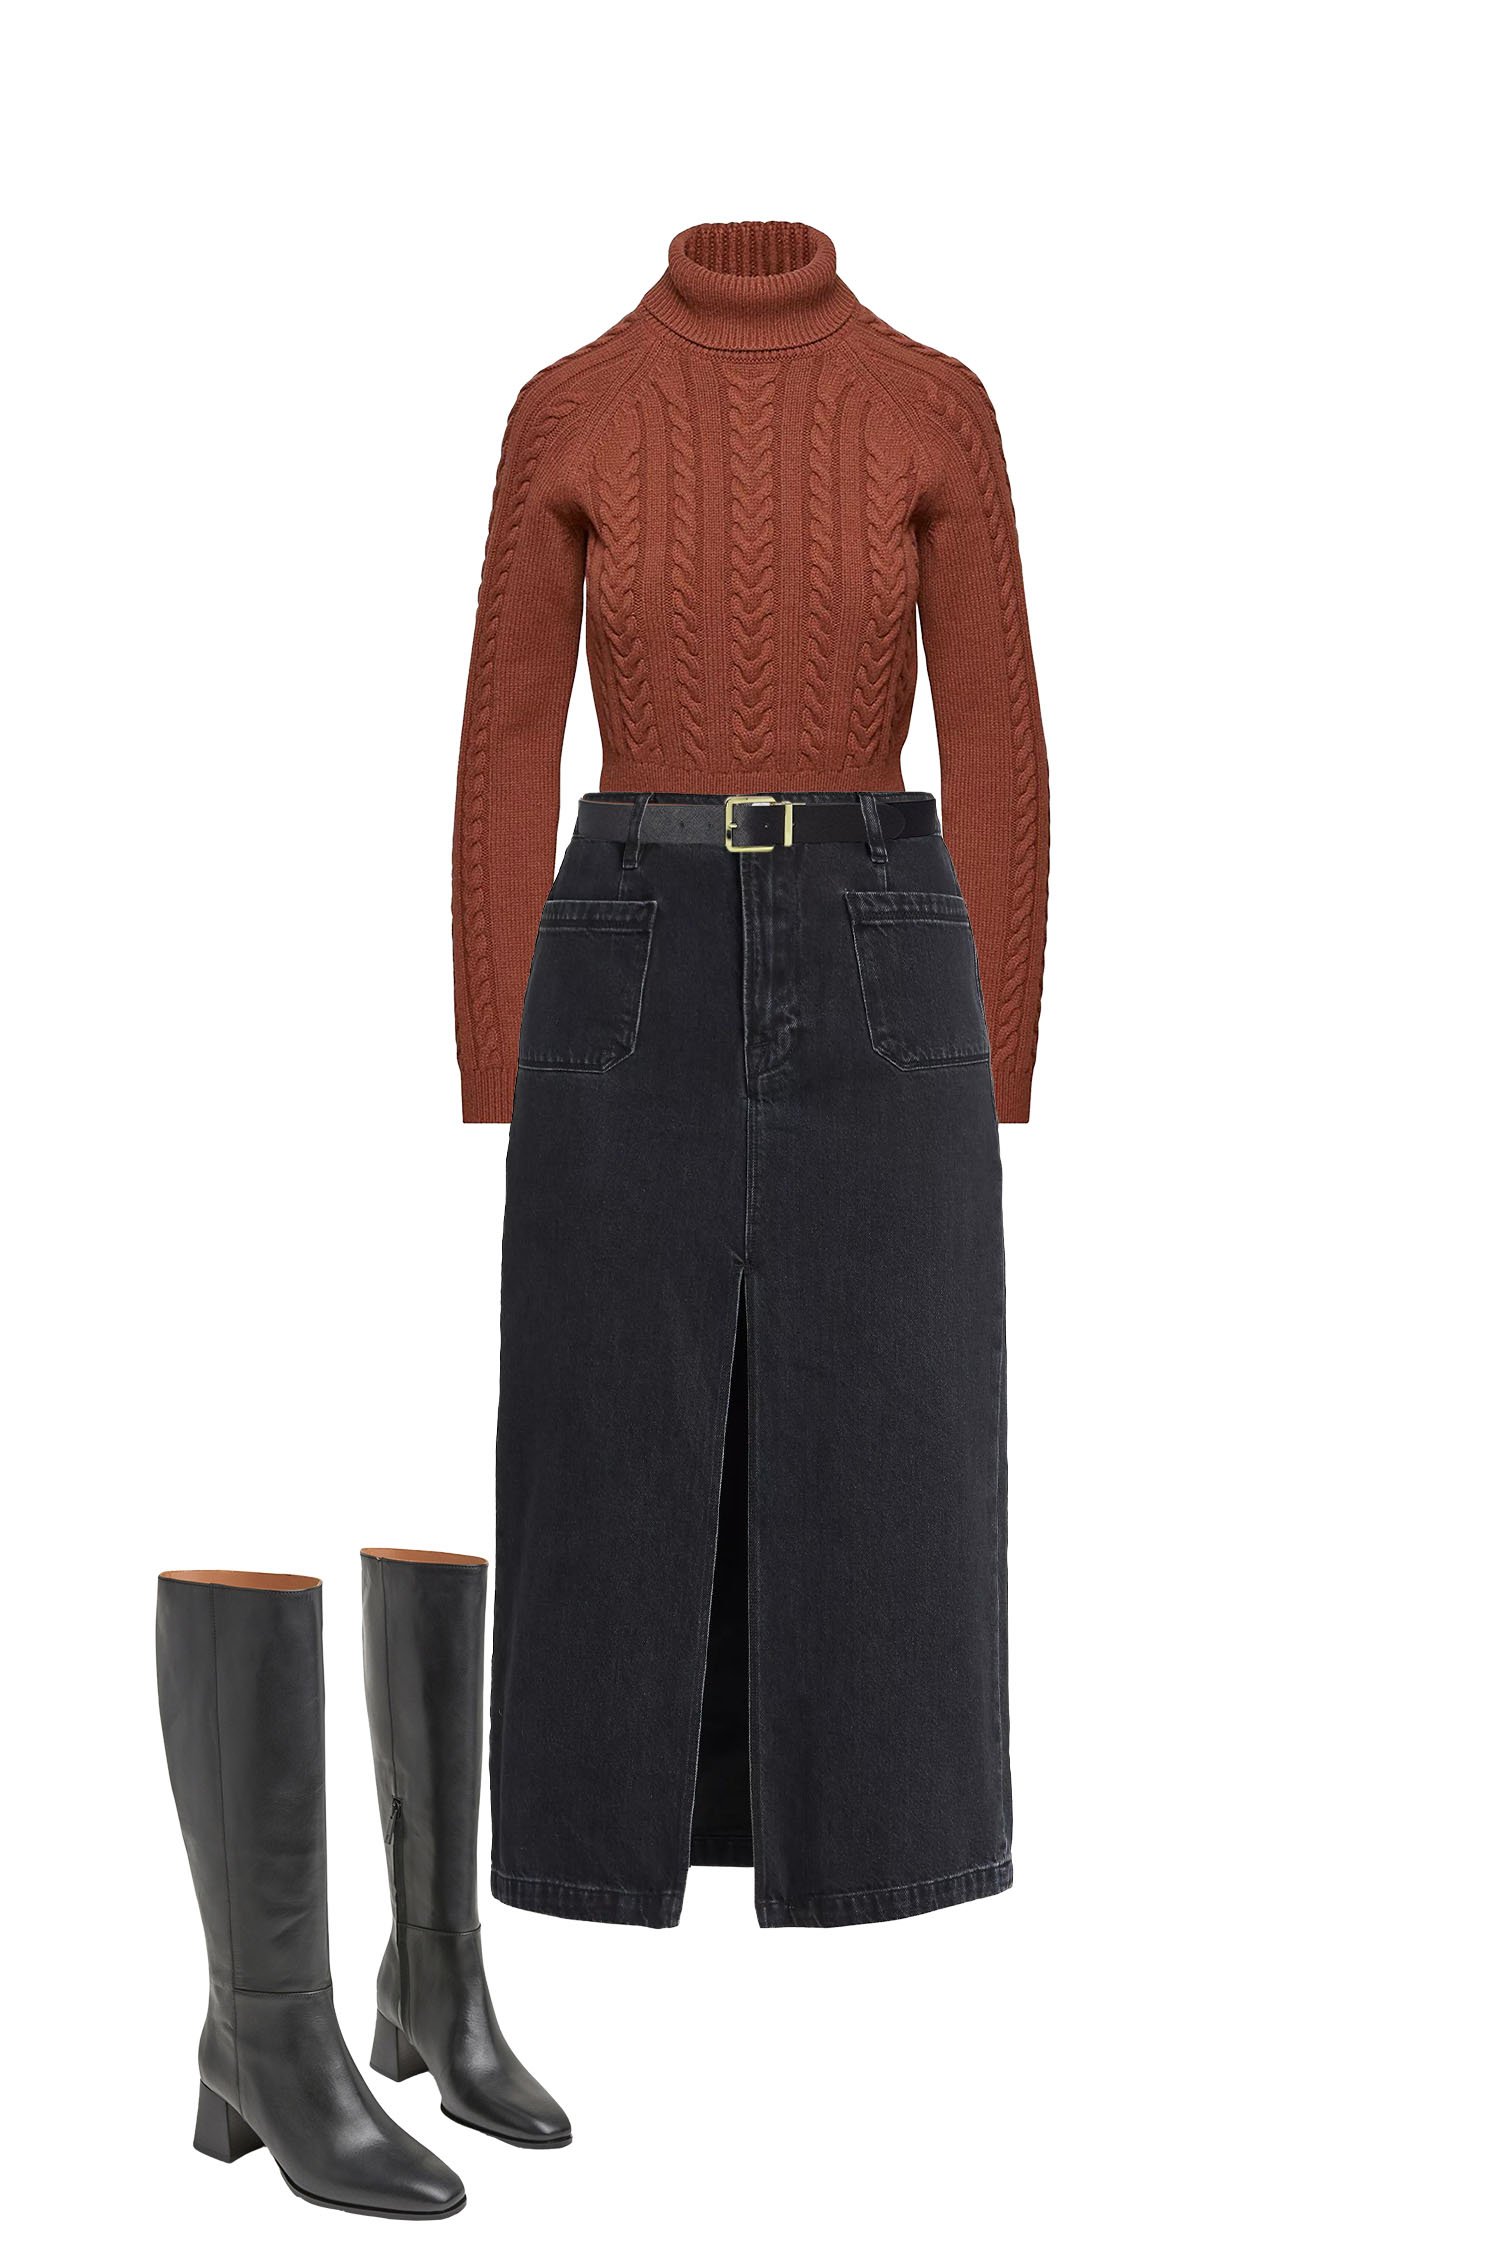 Black Denim Midi Skirt Outfit with Black Belt, Rust Brown Crop Turtleneck Sweater, and Black Knee High Boots